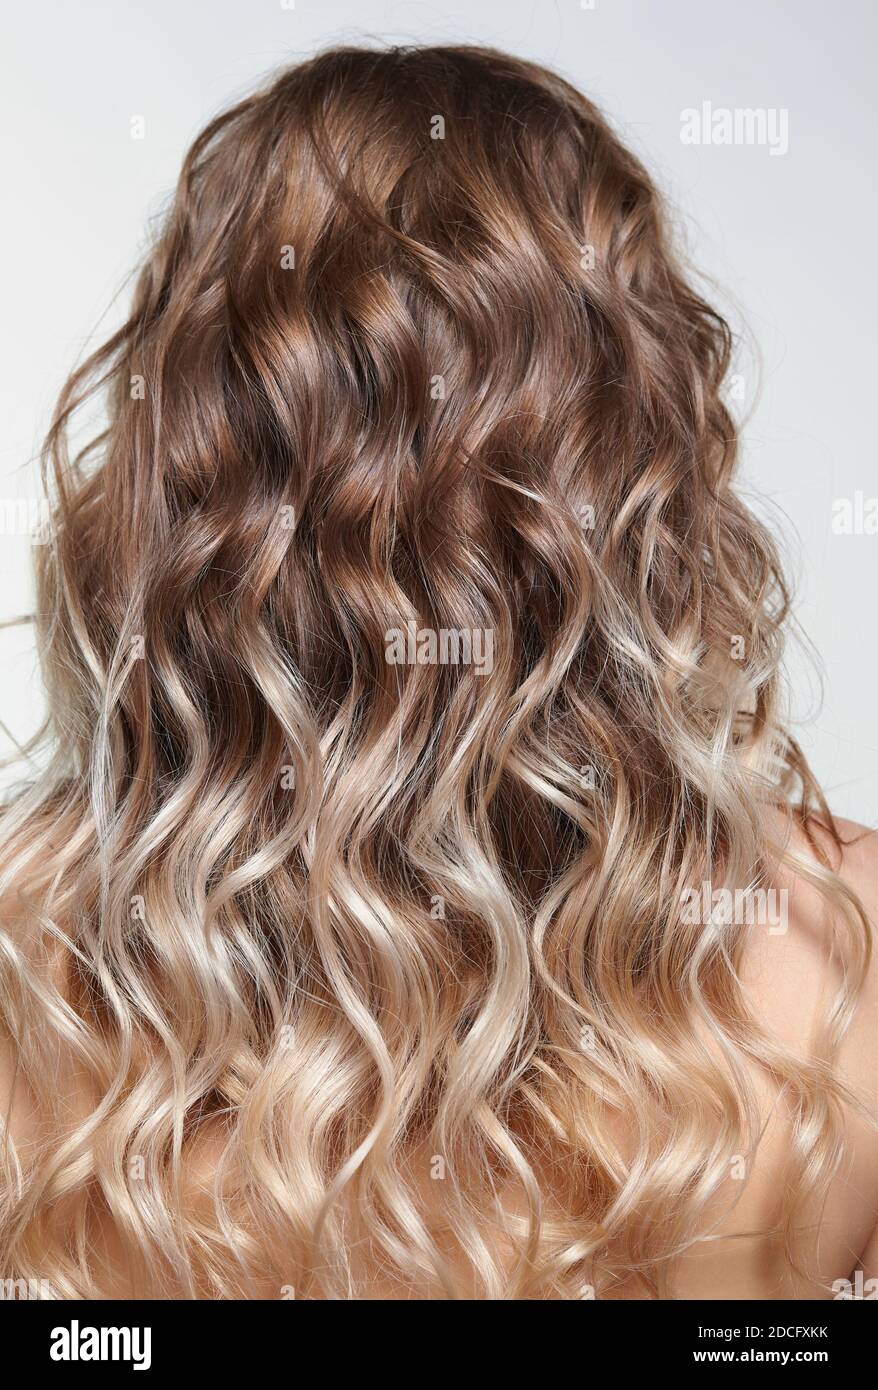 Woman from backside on gray background. Female with curly hair. Stock Photo